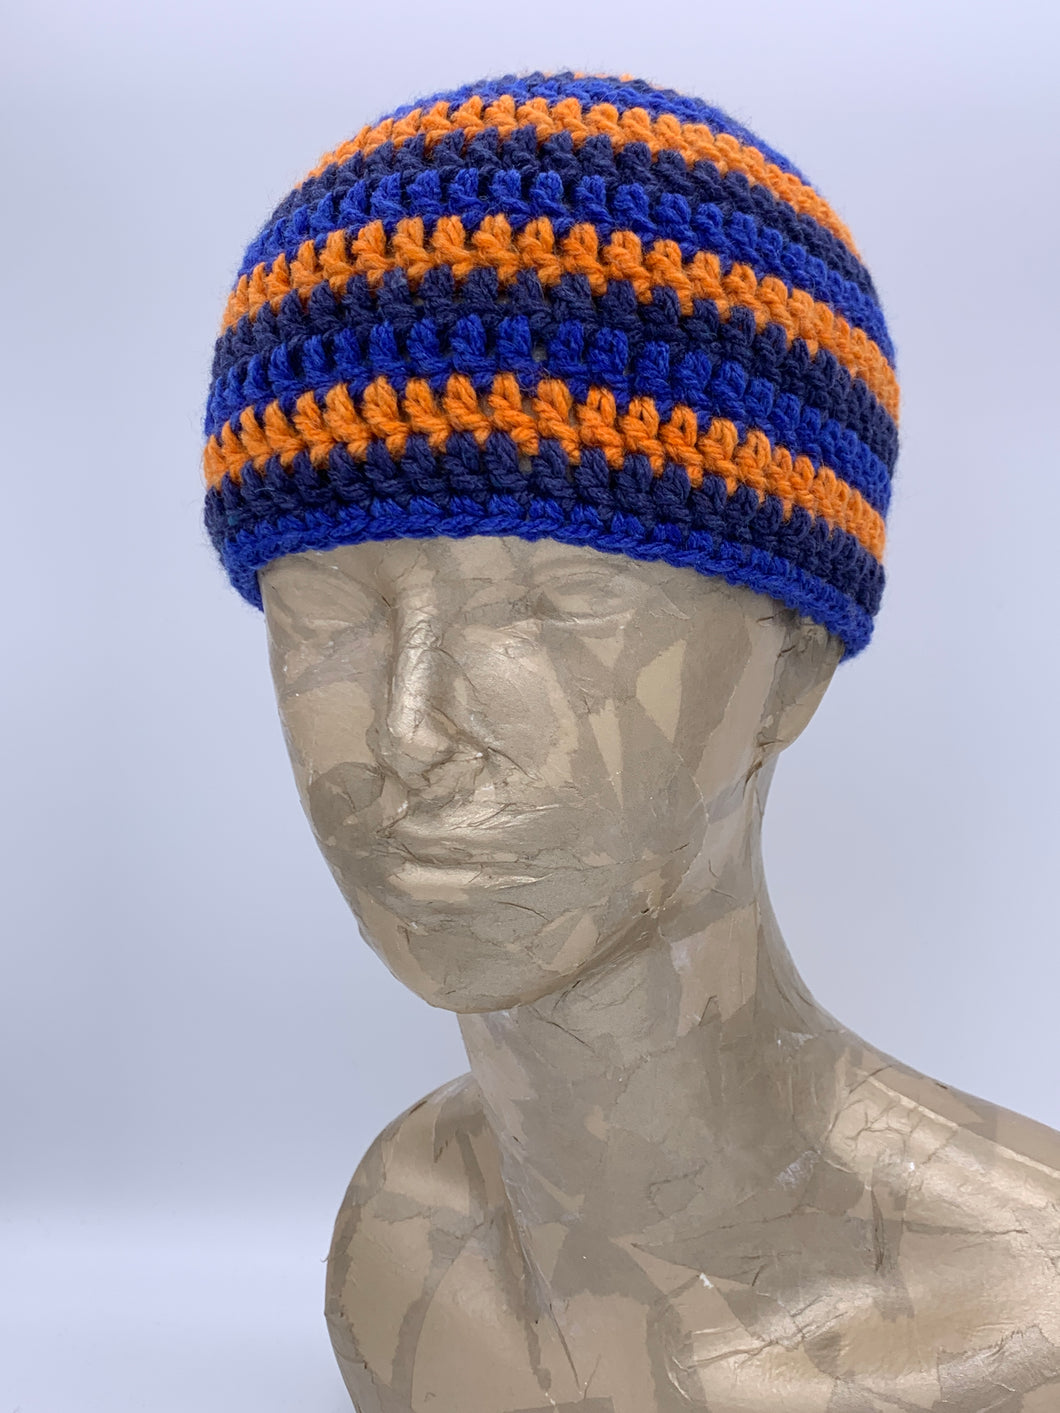 Crochet striped blue and orange beanie hat- Size Toddler 1-3 yrs